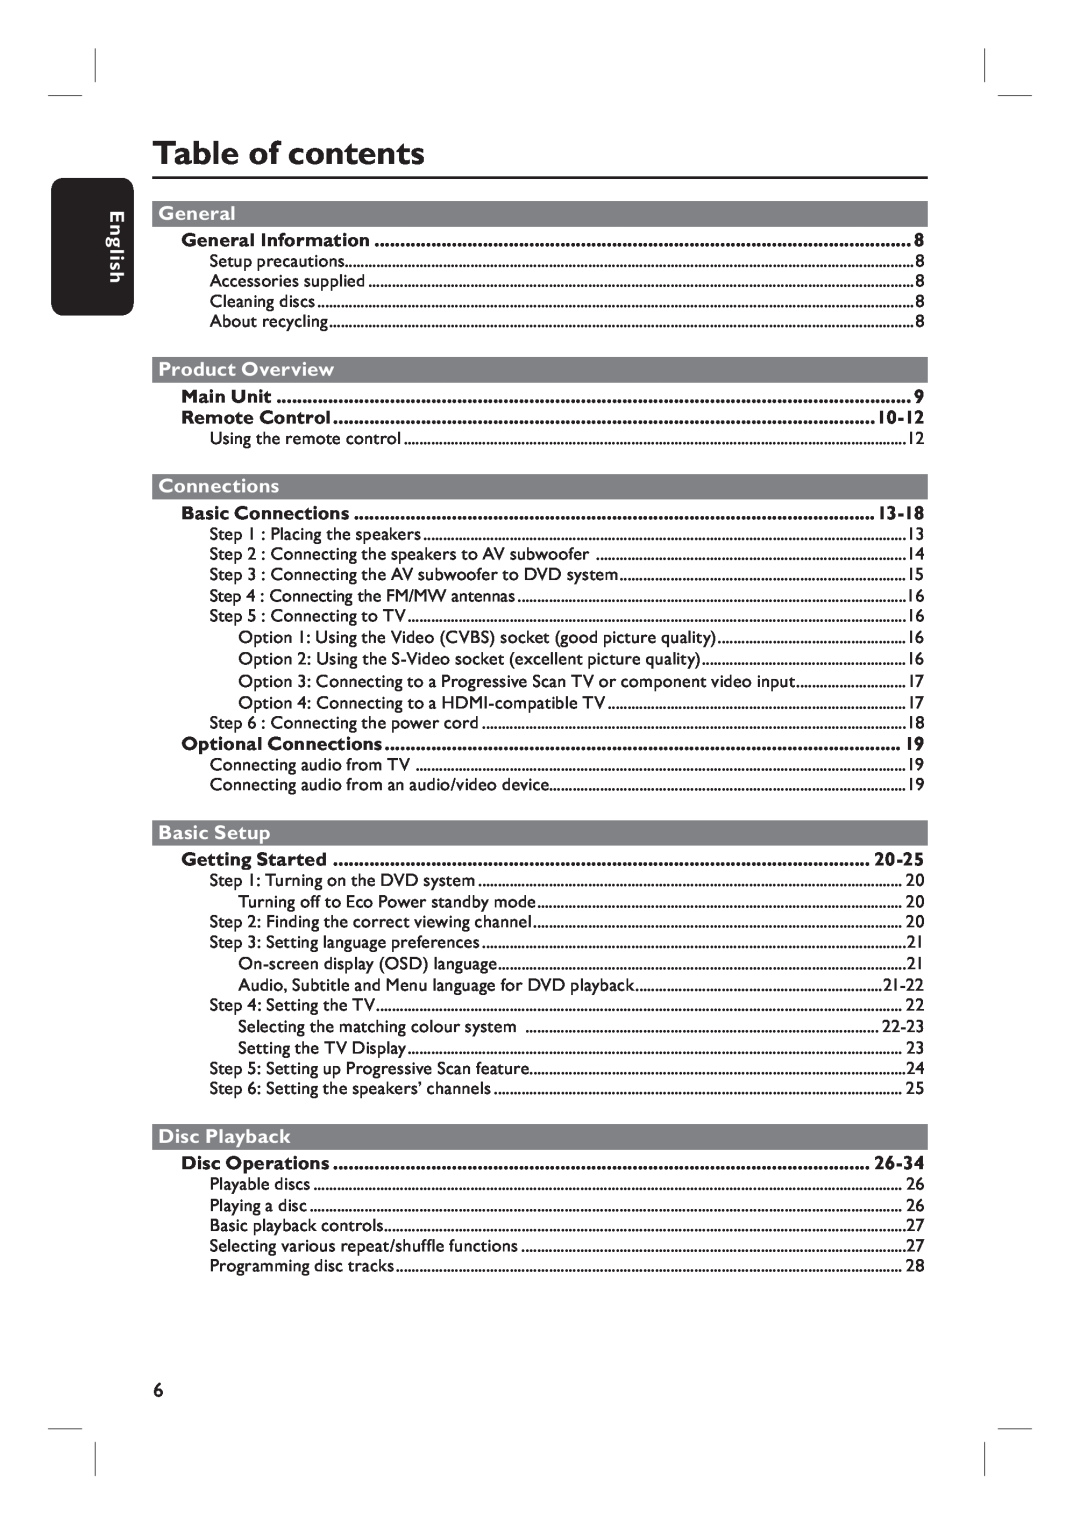 Philips HTS3455 user manual Table of contents, General, Product Overview, Connections, Basic Setup, Disc Playback, English 